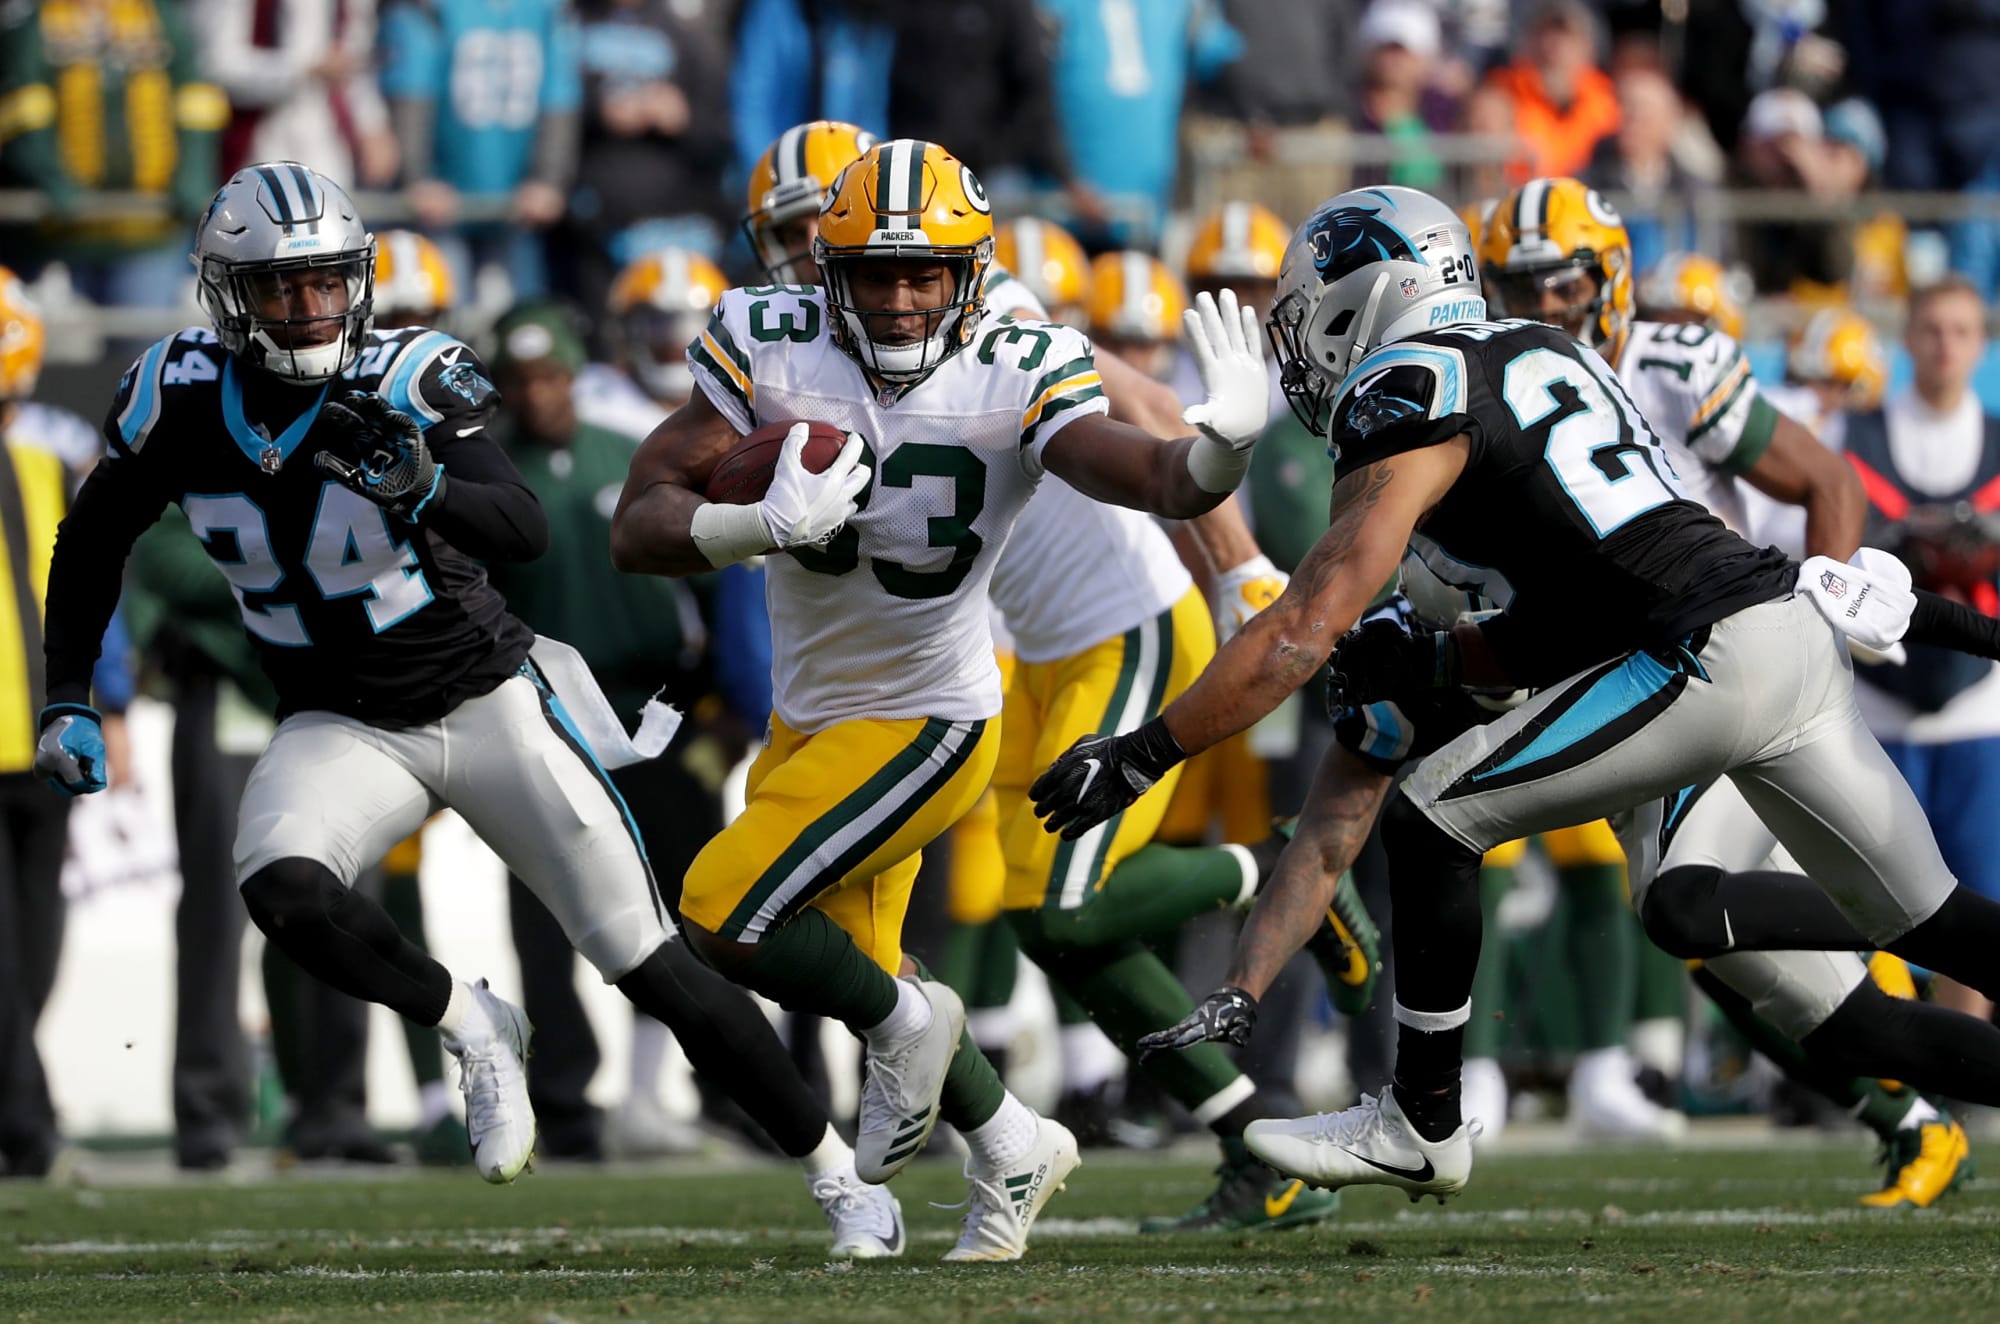 Packers vs. Panthers Tale of the tape for Week 10 matchup